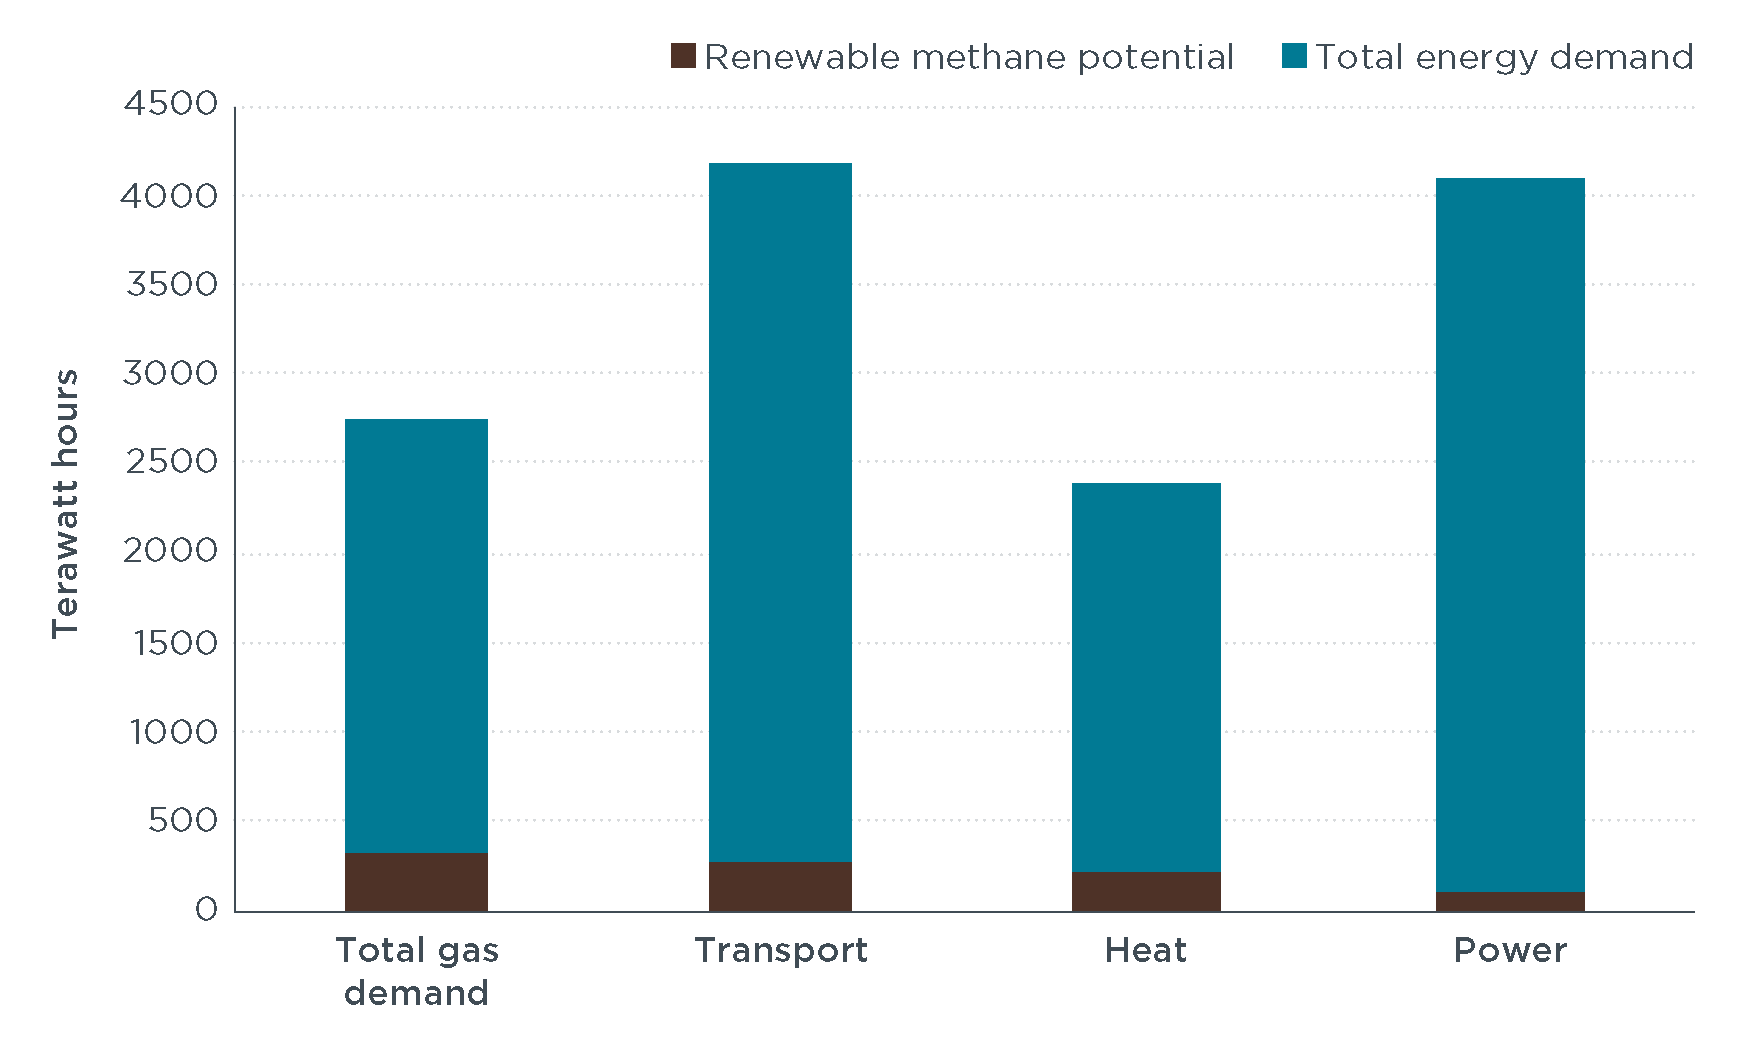 Potential contribution of renewable methane to projected total gas demand